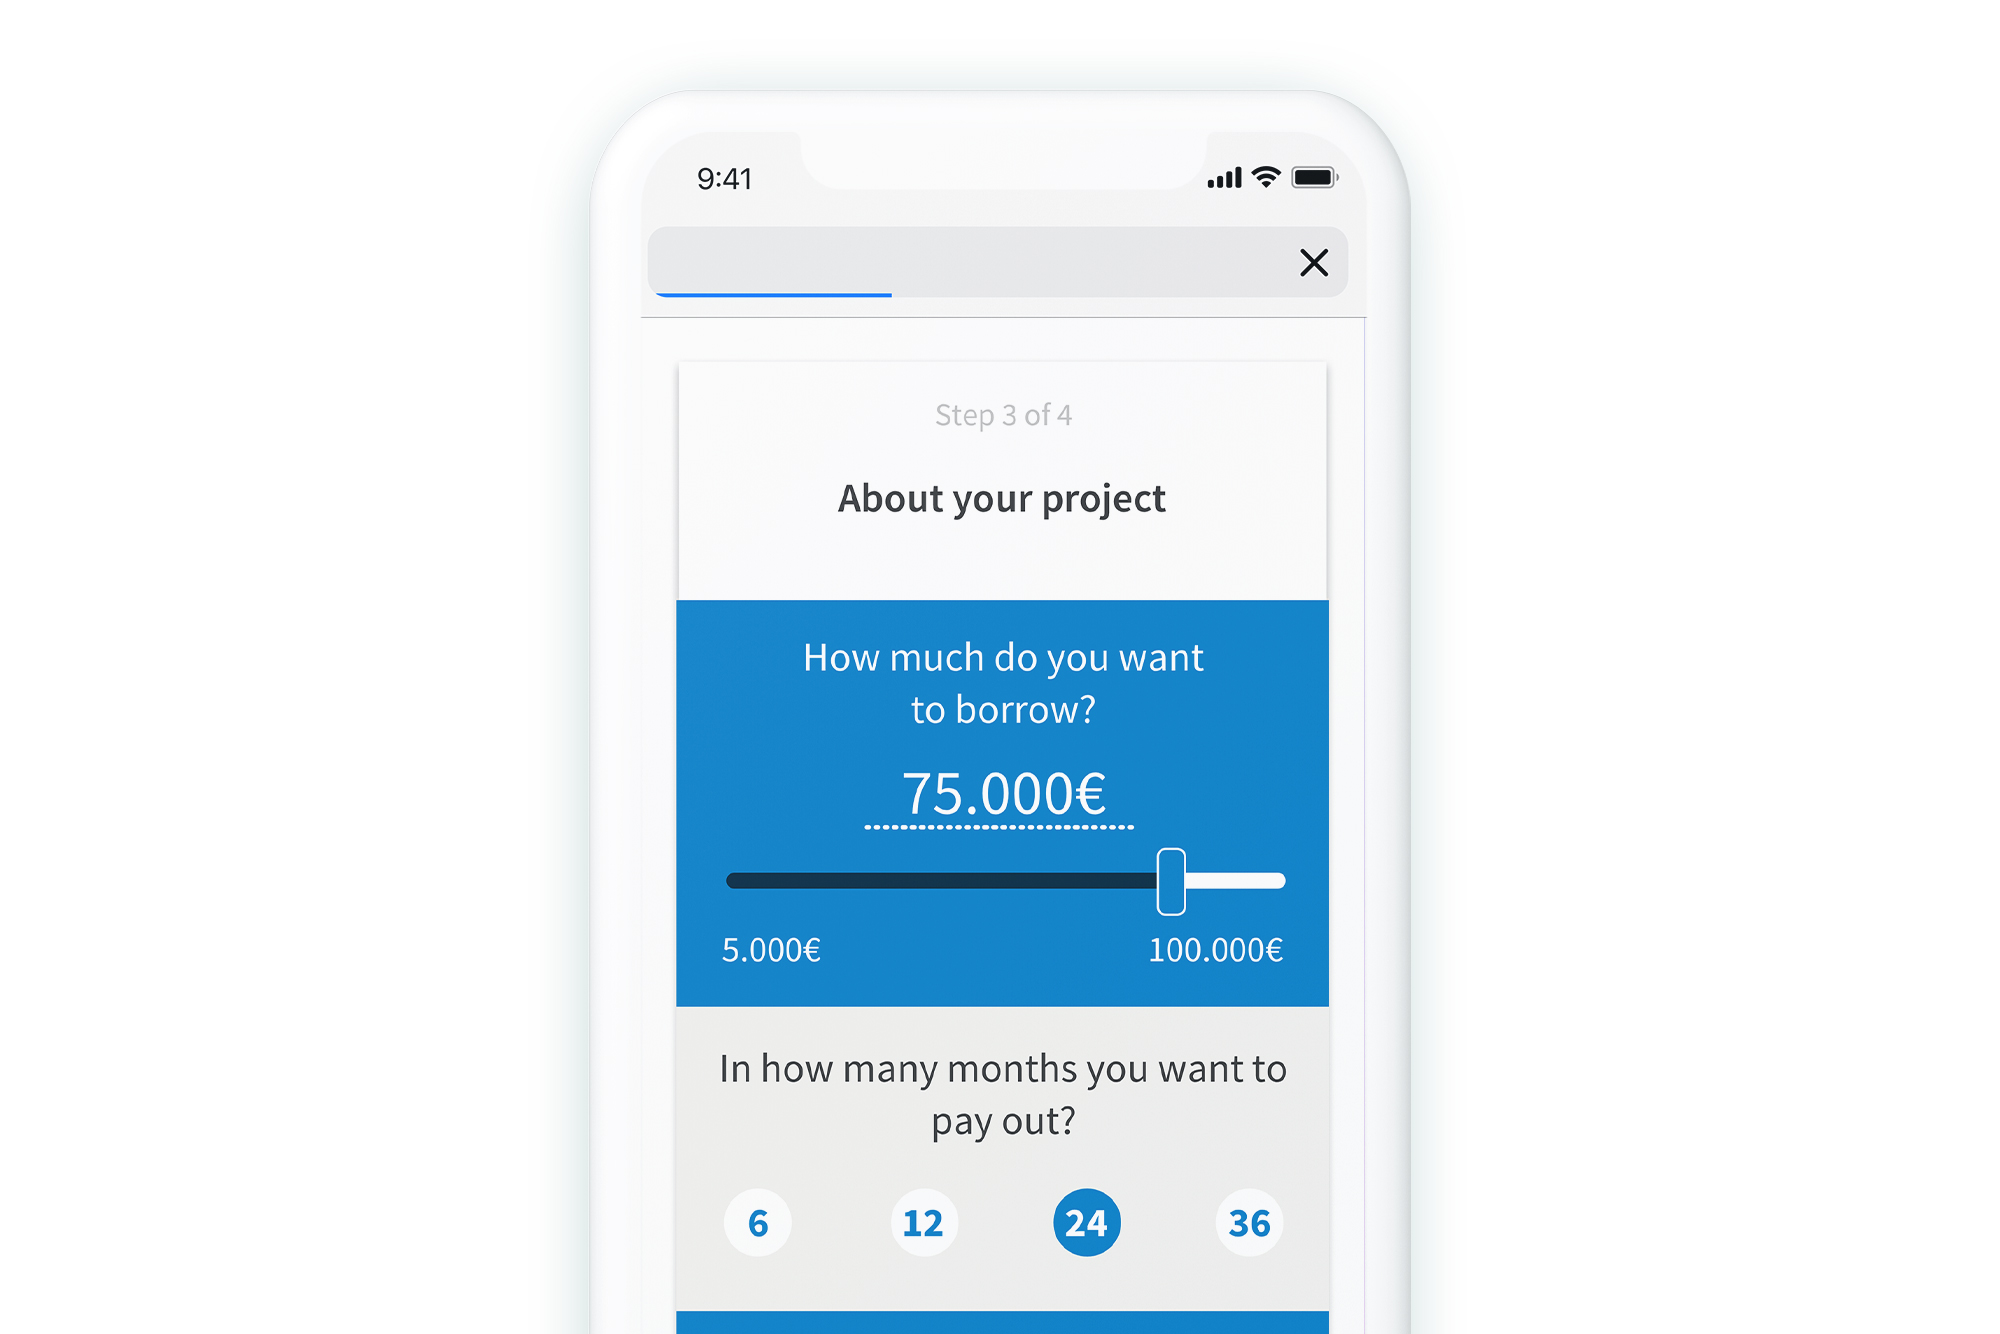 A phone mockup shows the borrower application detail of the calculator